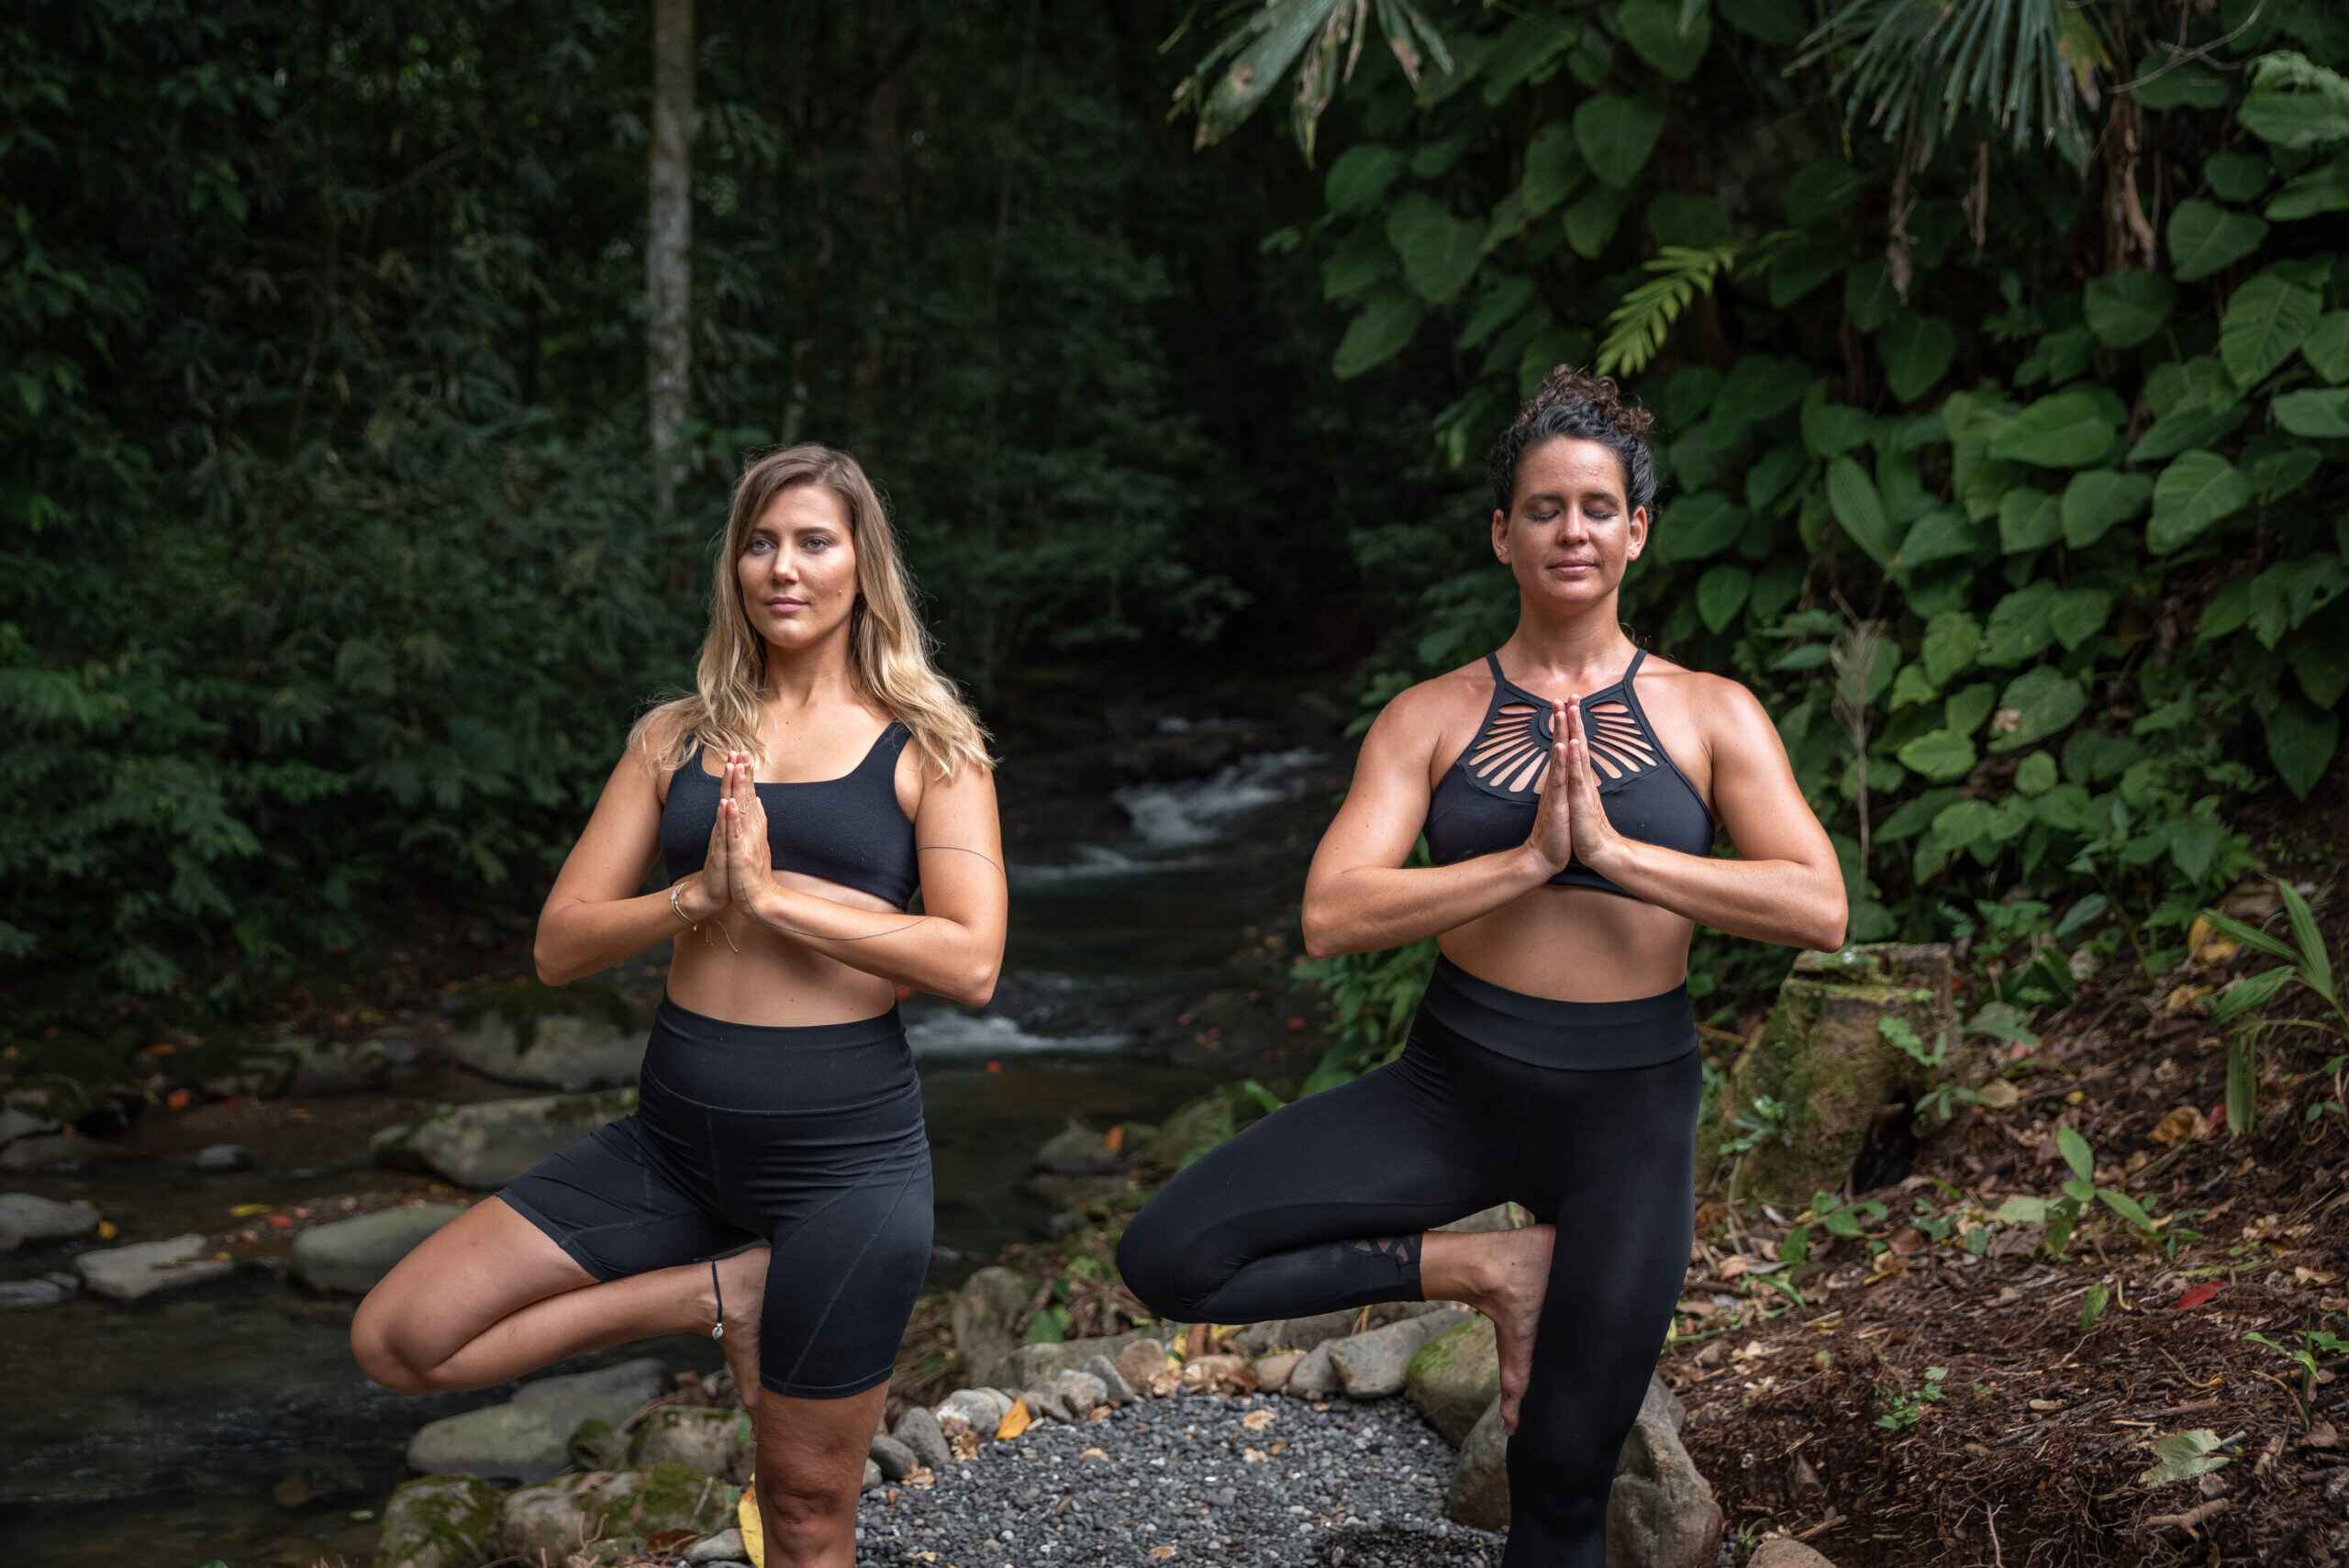 Immerse in pure bliss at Vayu Retreat Villas, Costa Rica's premier wellness destination. Witness two empowered women finding serenity through outdoor yoga amidst the breathtaking ambiance. Plan your unforgettable stay at our transformative hotel nestled in the heart of Costa Rica's natural paradise